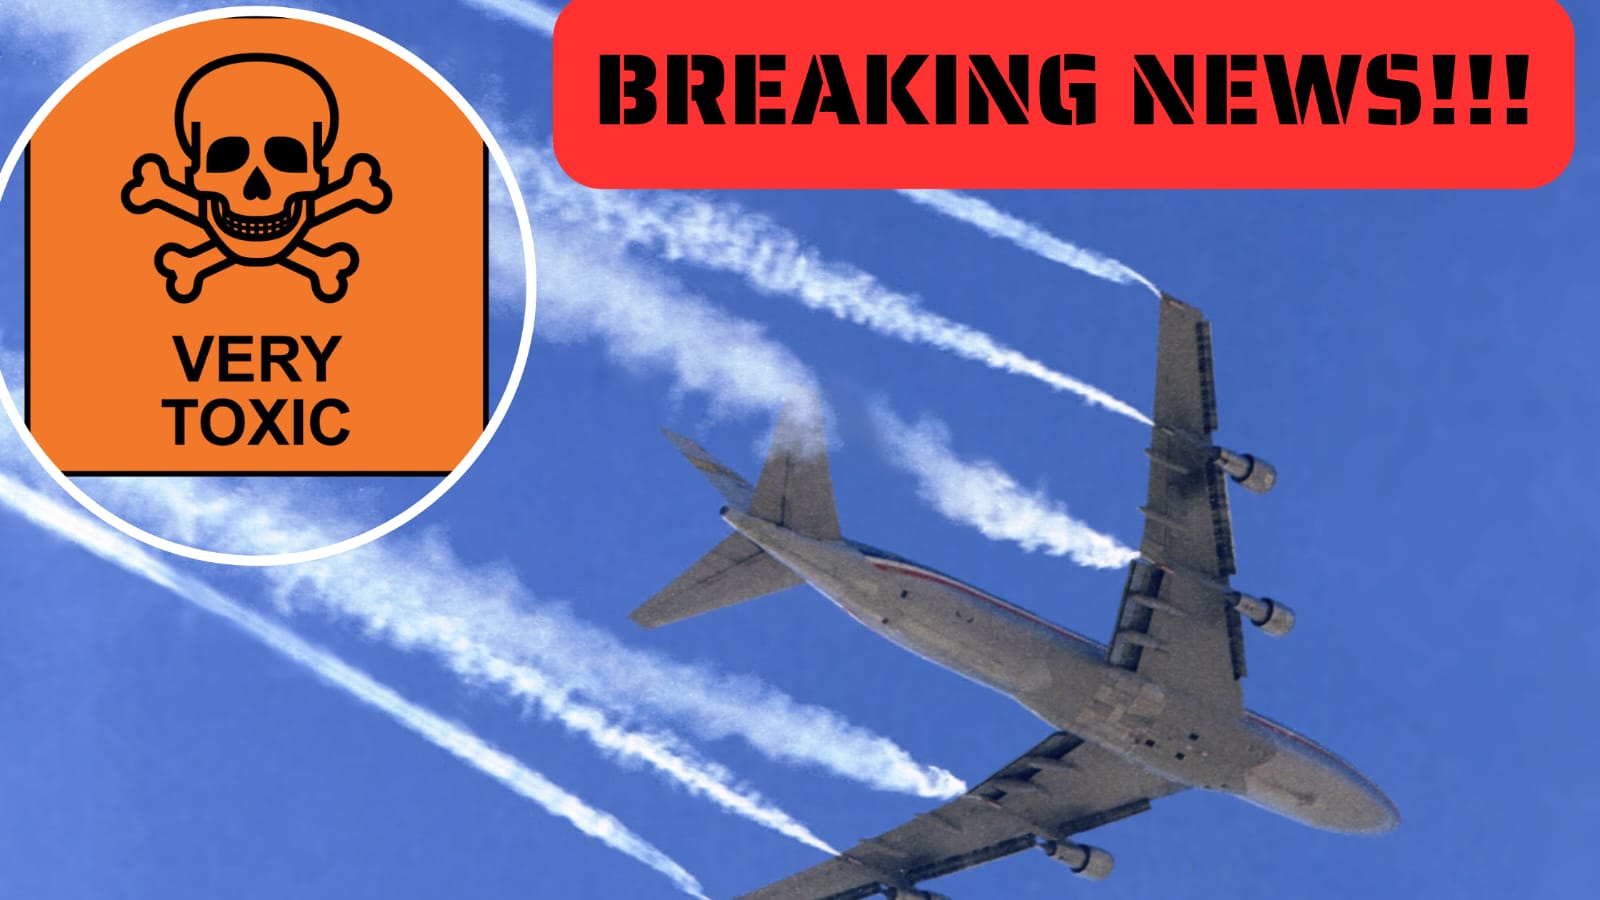 BREAKING NEWS!!! DEADLY CHEMTRAILS !!! A Global Conspiracy Threatening Mind and Body !!!